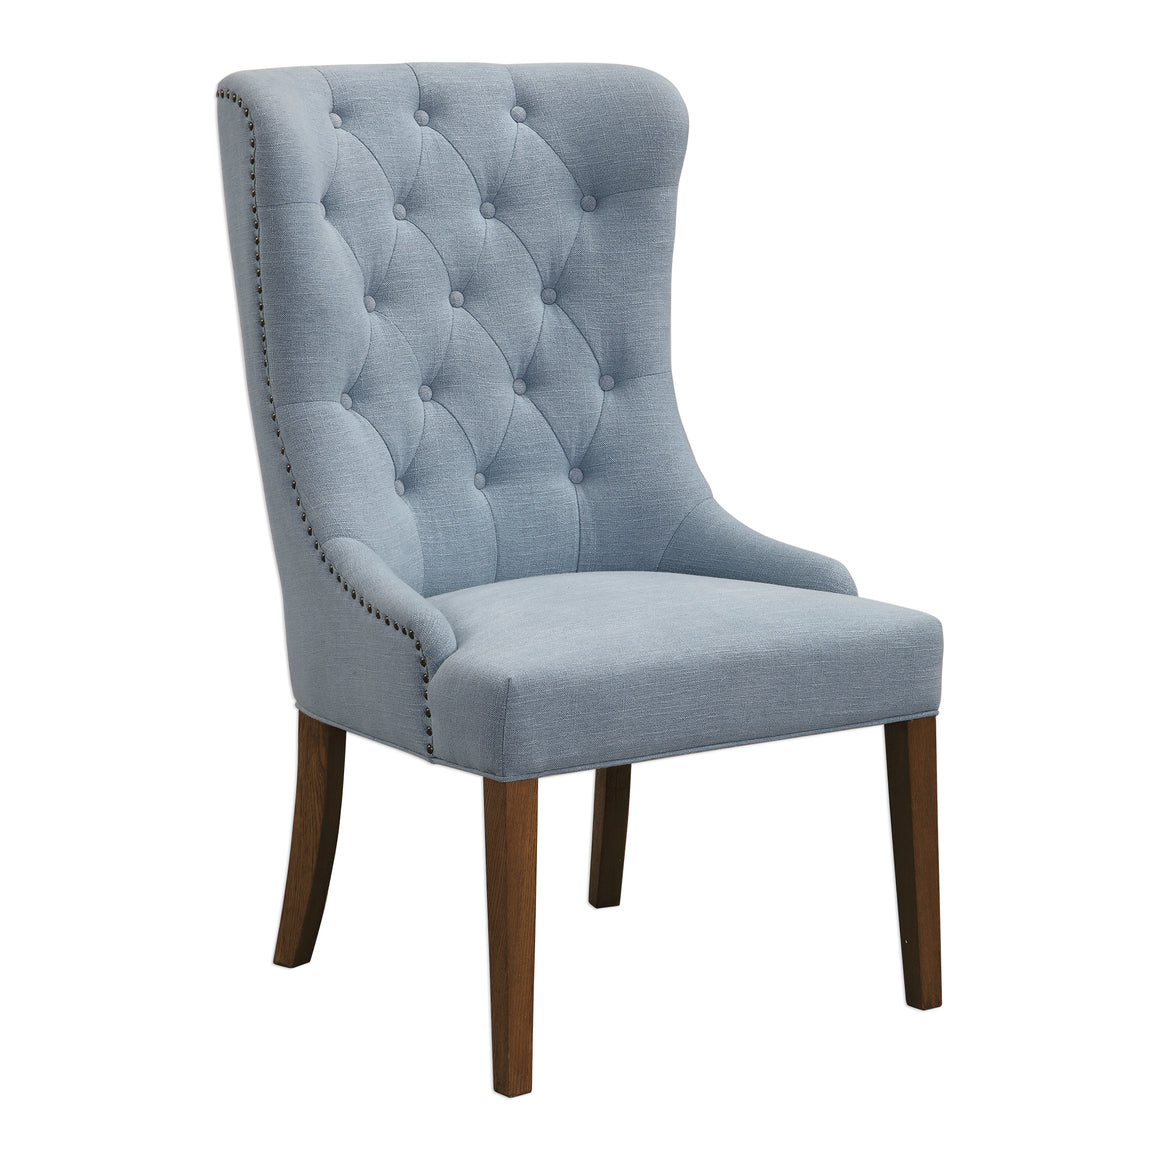 Rioni Tufted Wing Chair